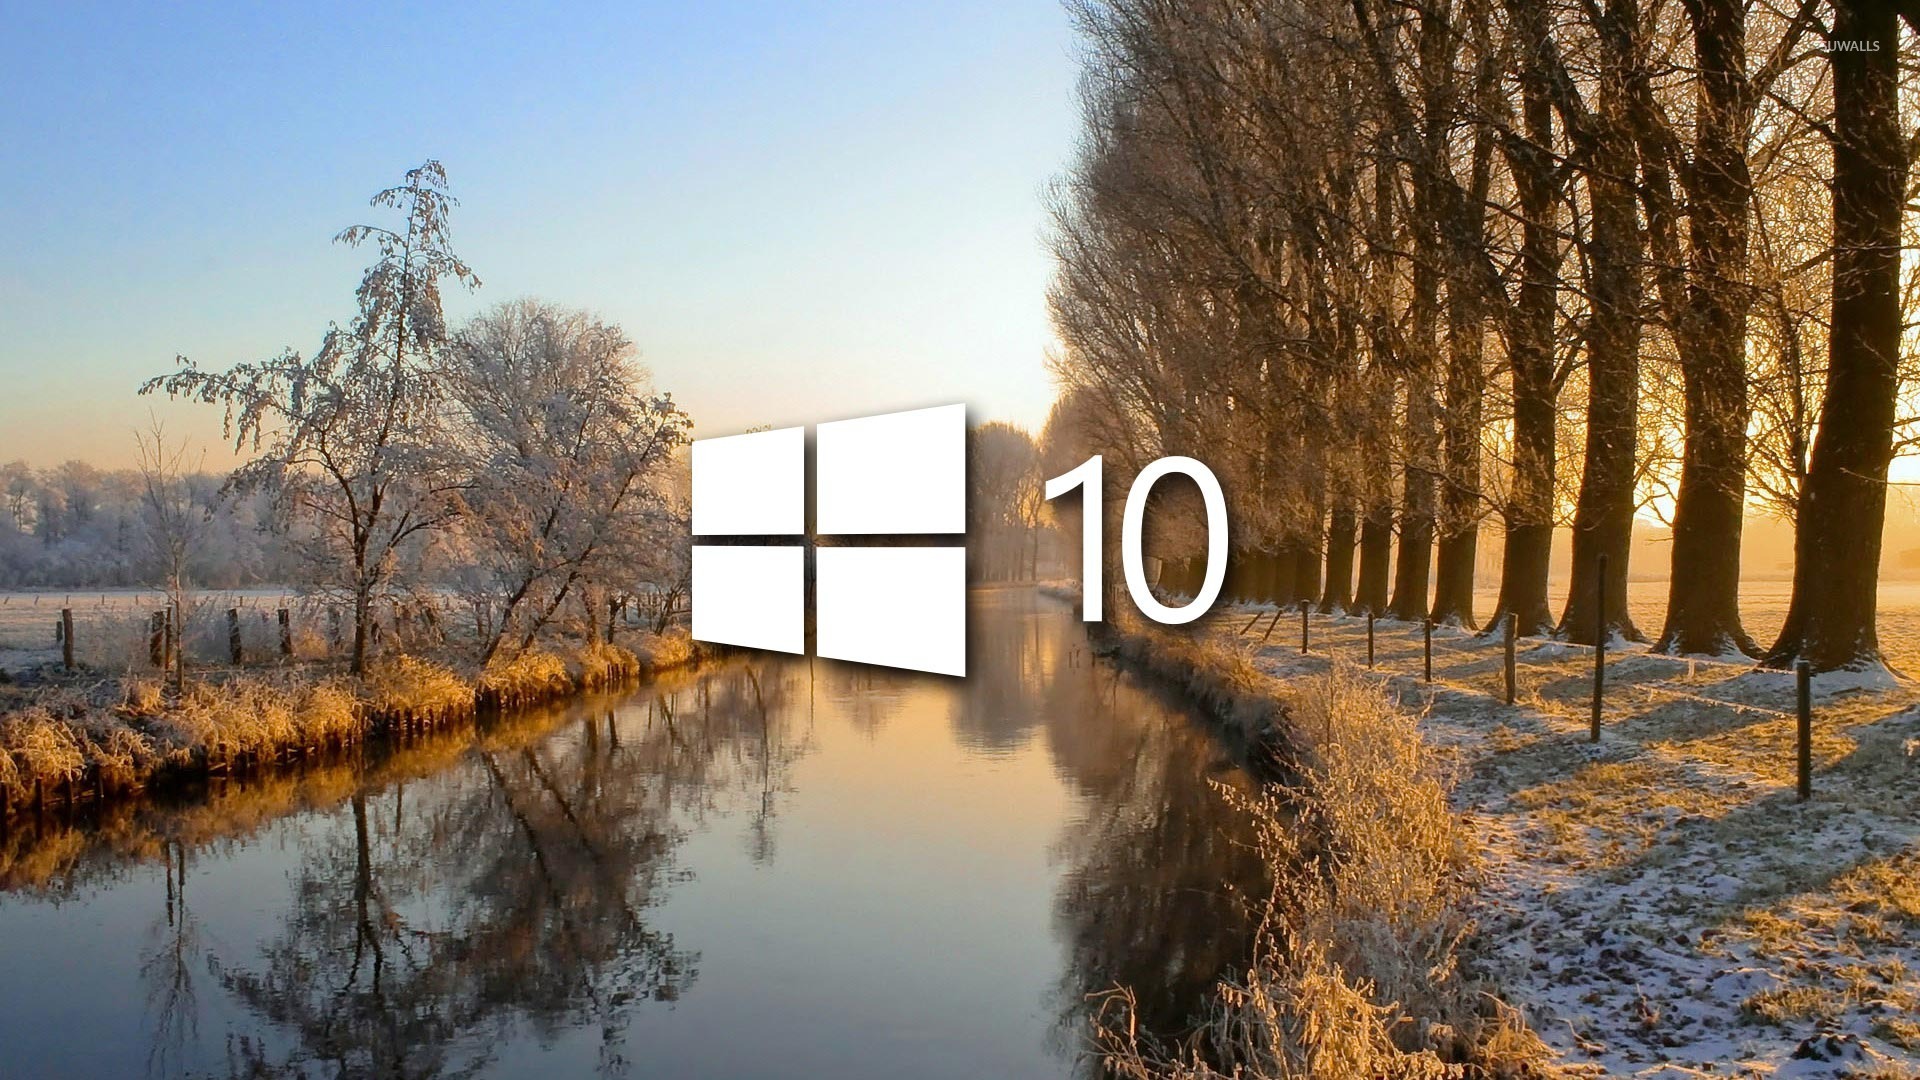 Windows 10 on the frosty river wallpaper   Computer wallpapers 1920x1080